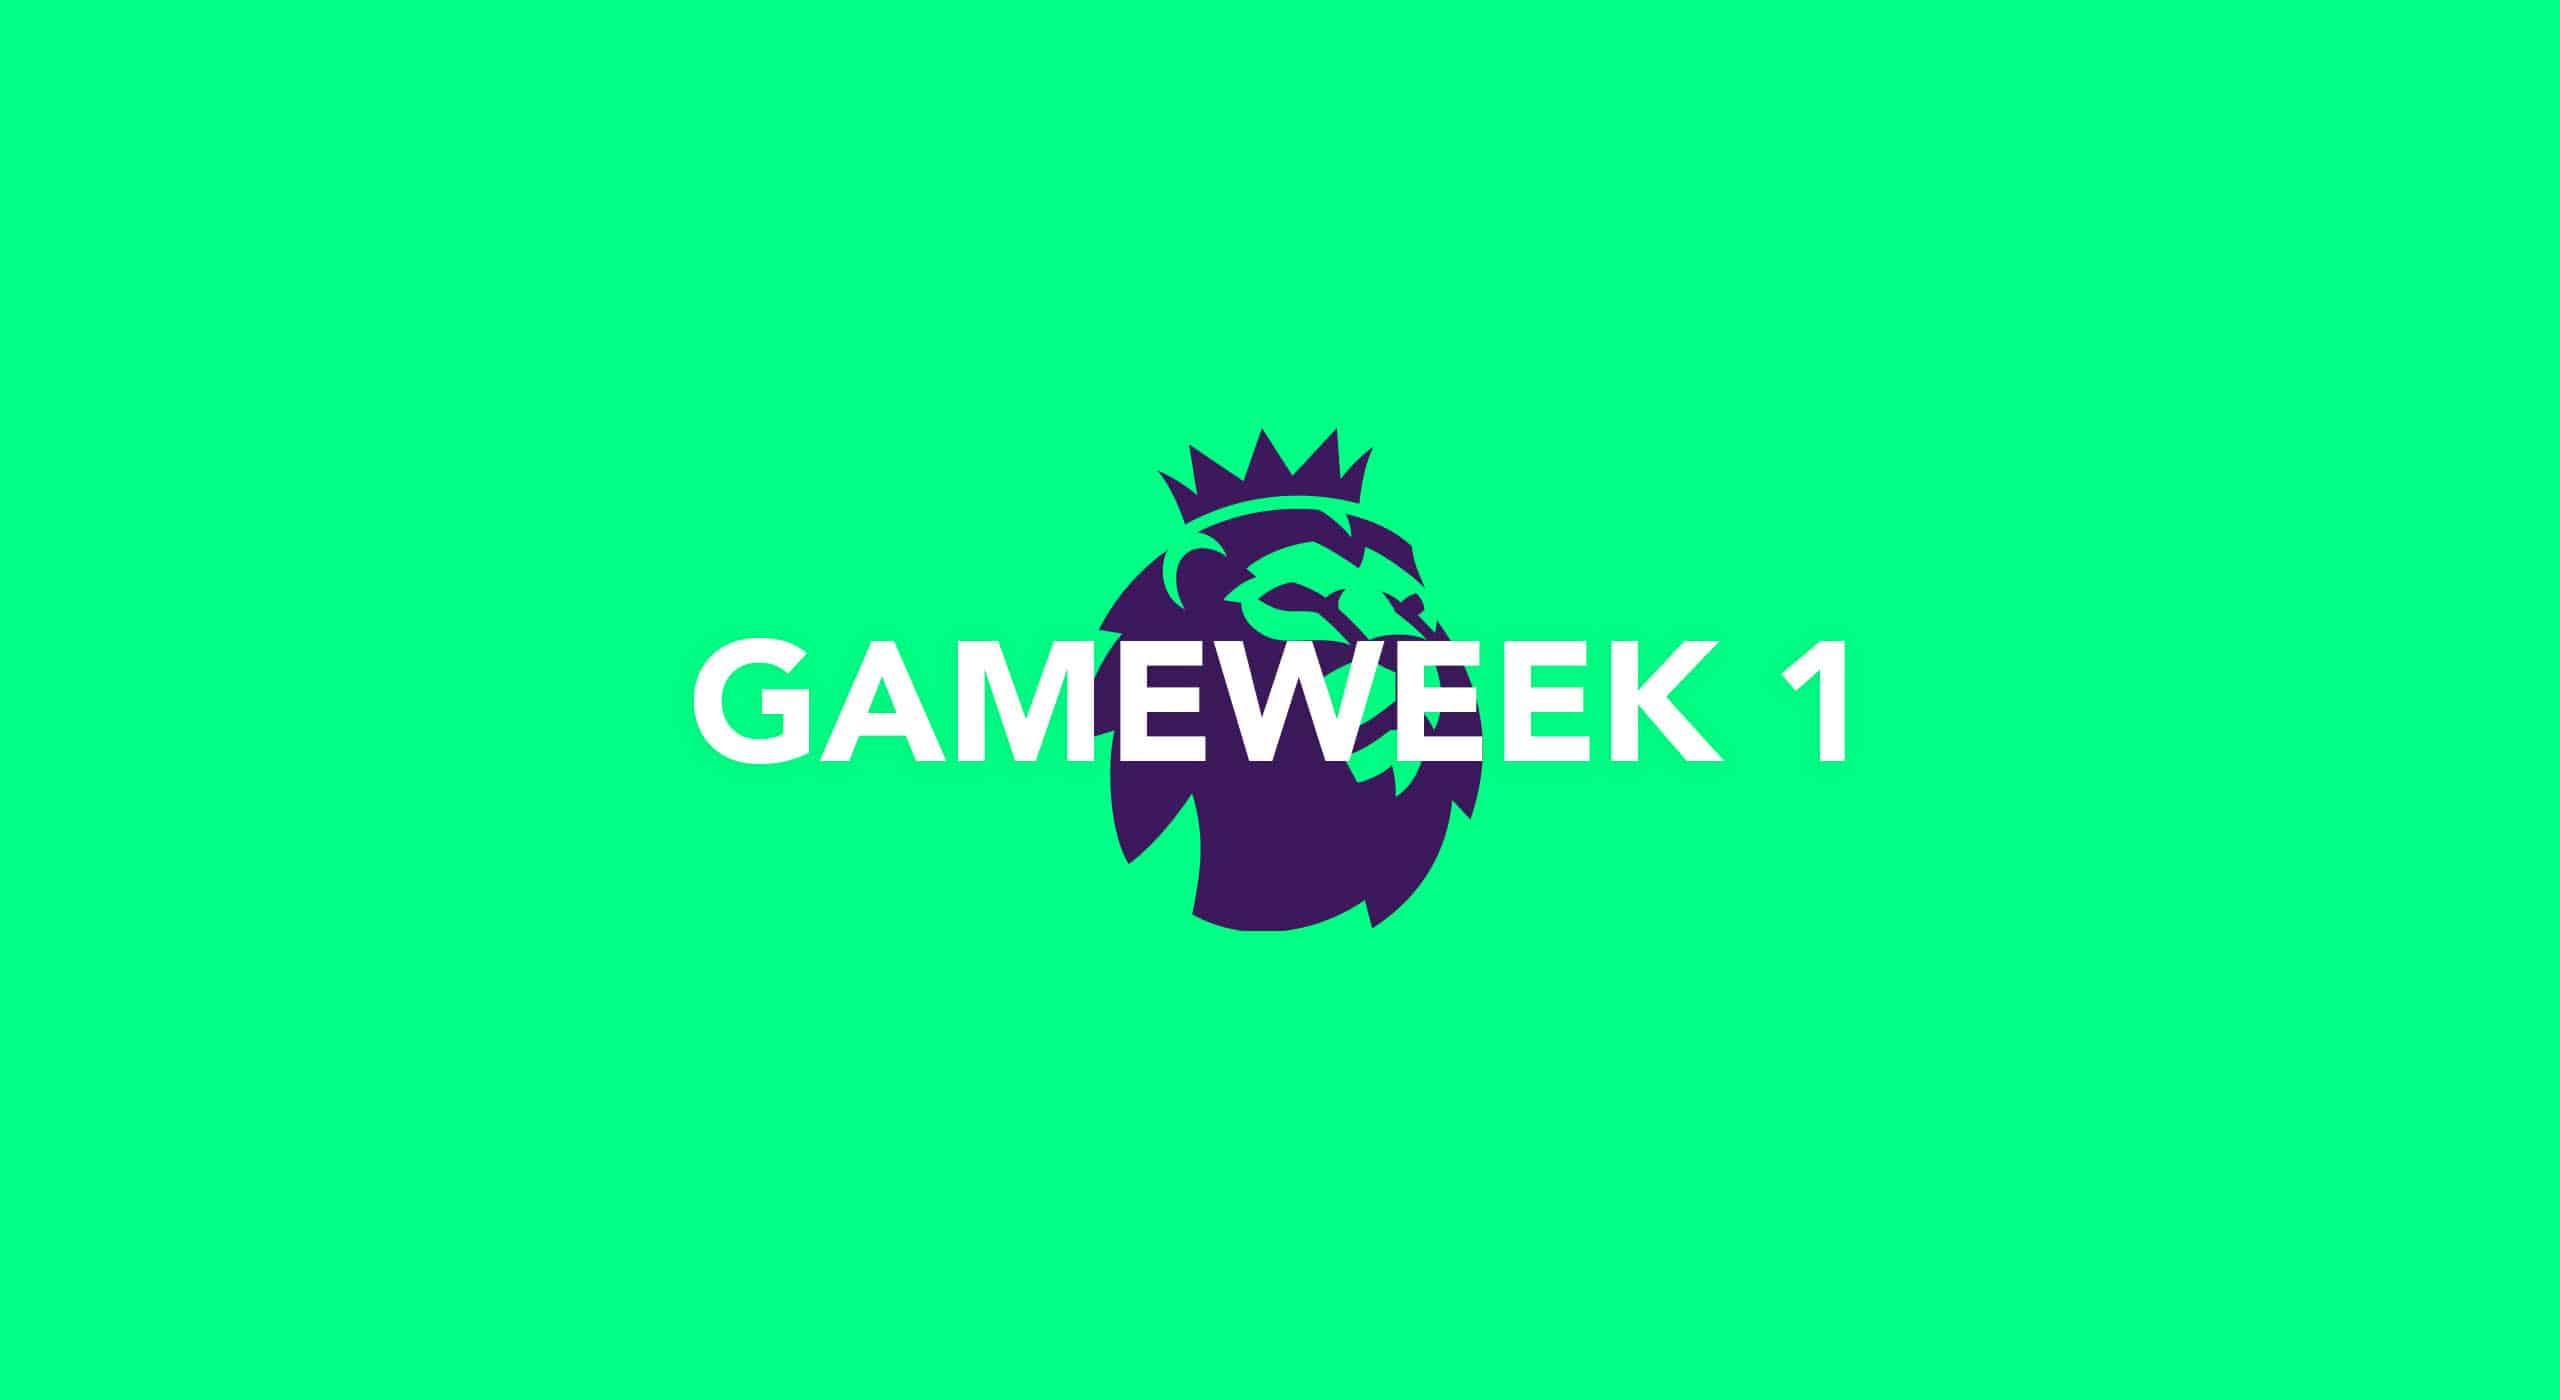 Preview of and tips for Gameweek 1 of the 2022/23 Fantasy Premier League season